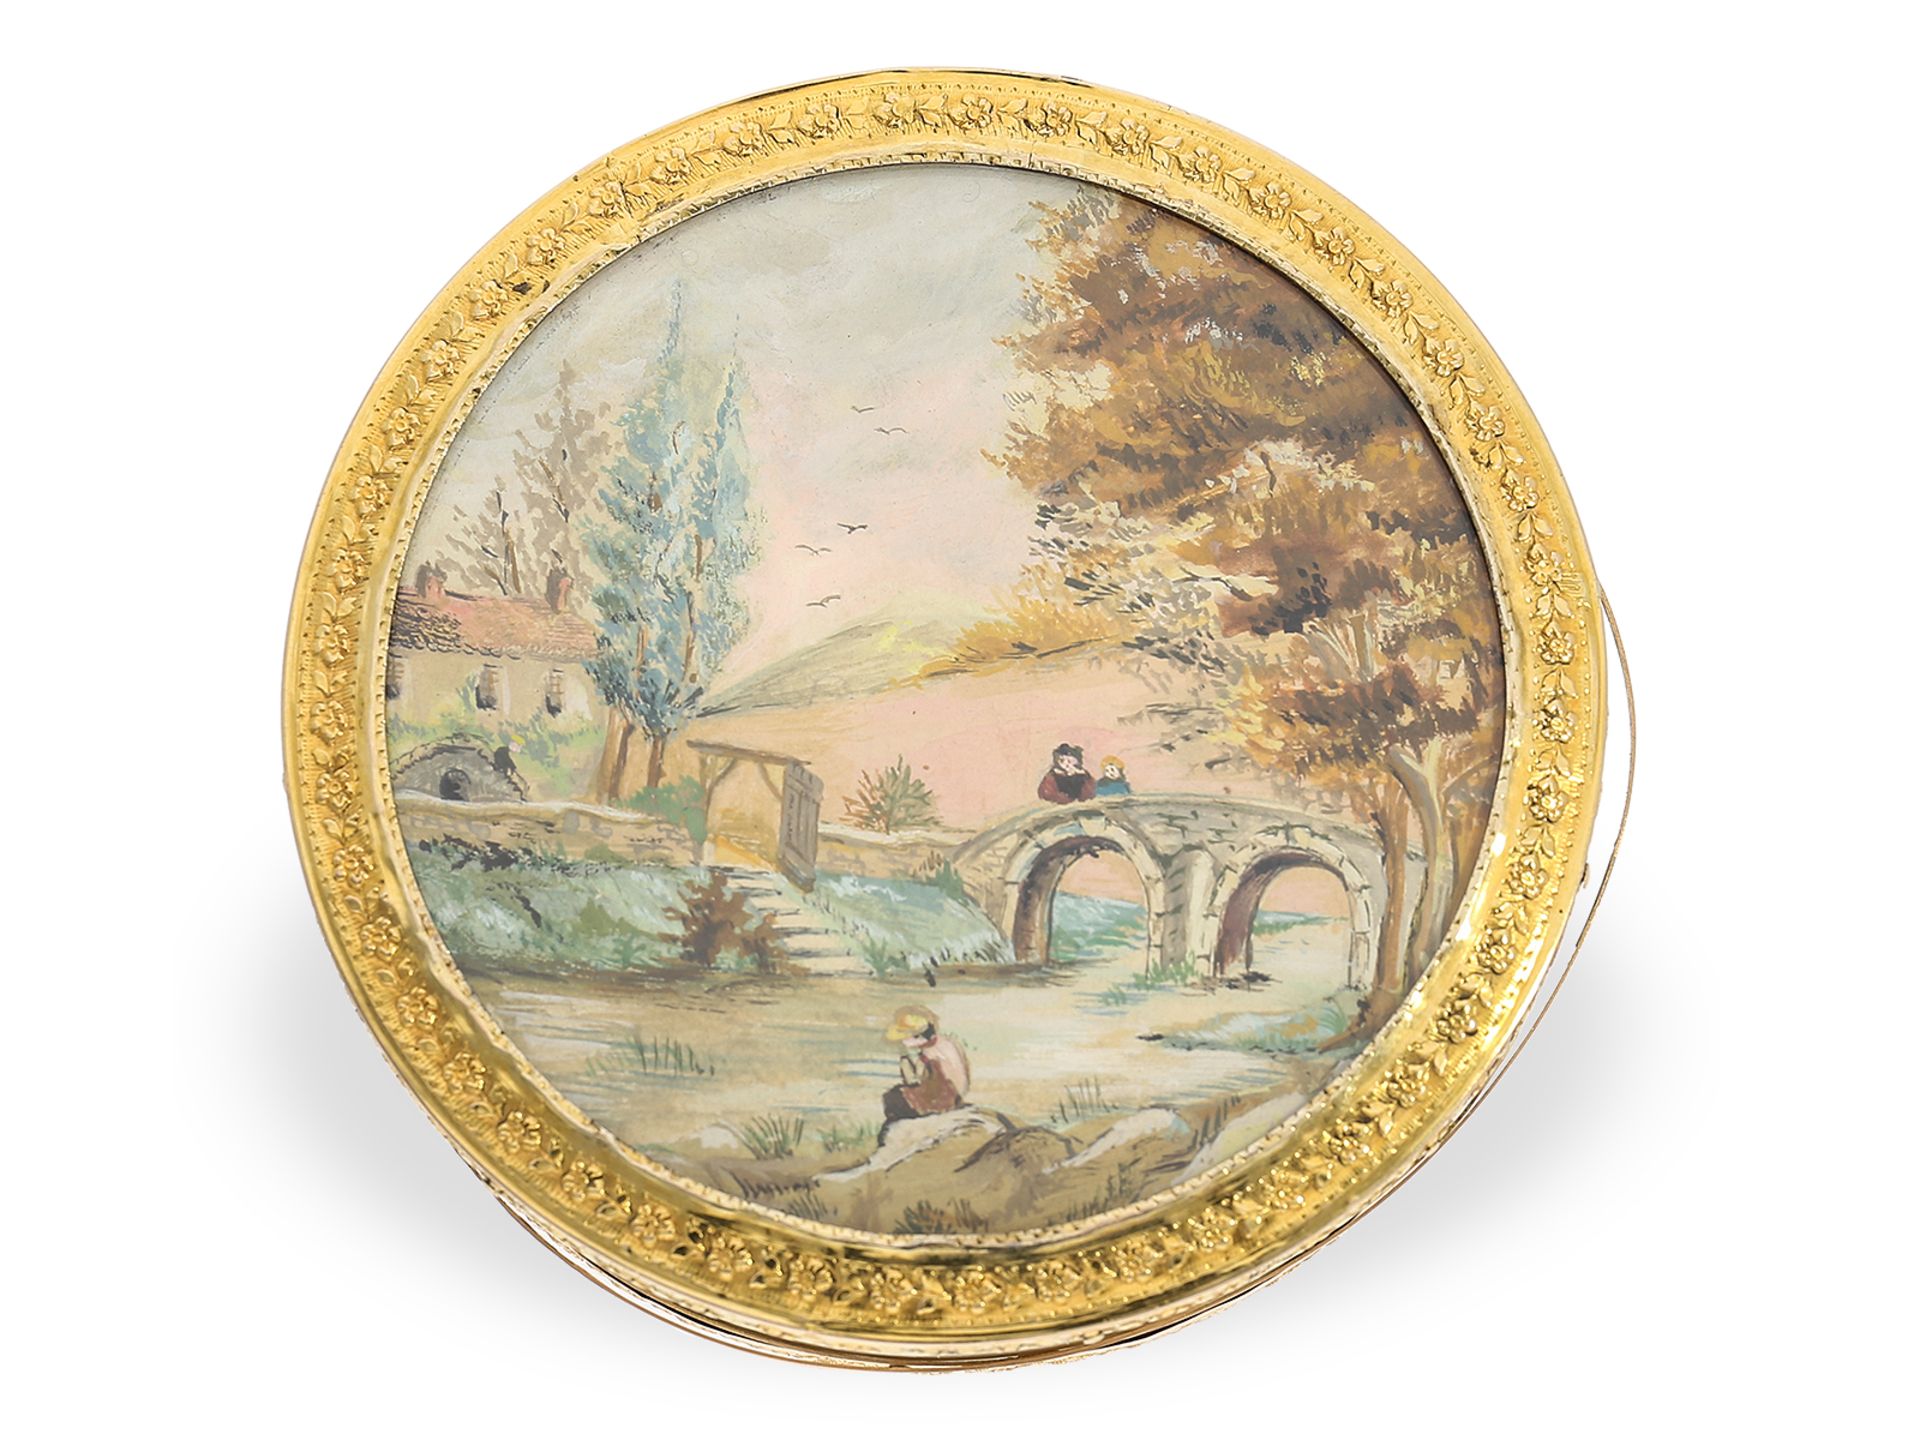 Unique antique snuff box, gold/ivory/tortoiseshell, painting "Circus Spectacle with Rise of a Balloo - Image 2 of 5